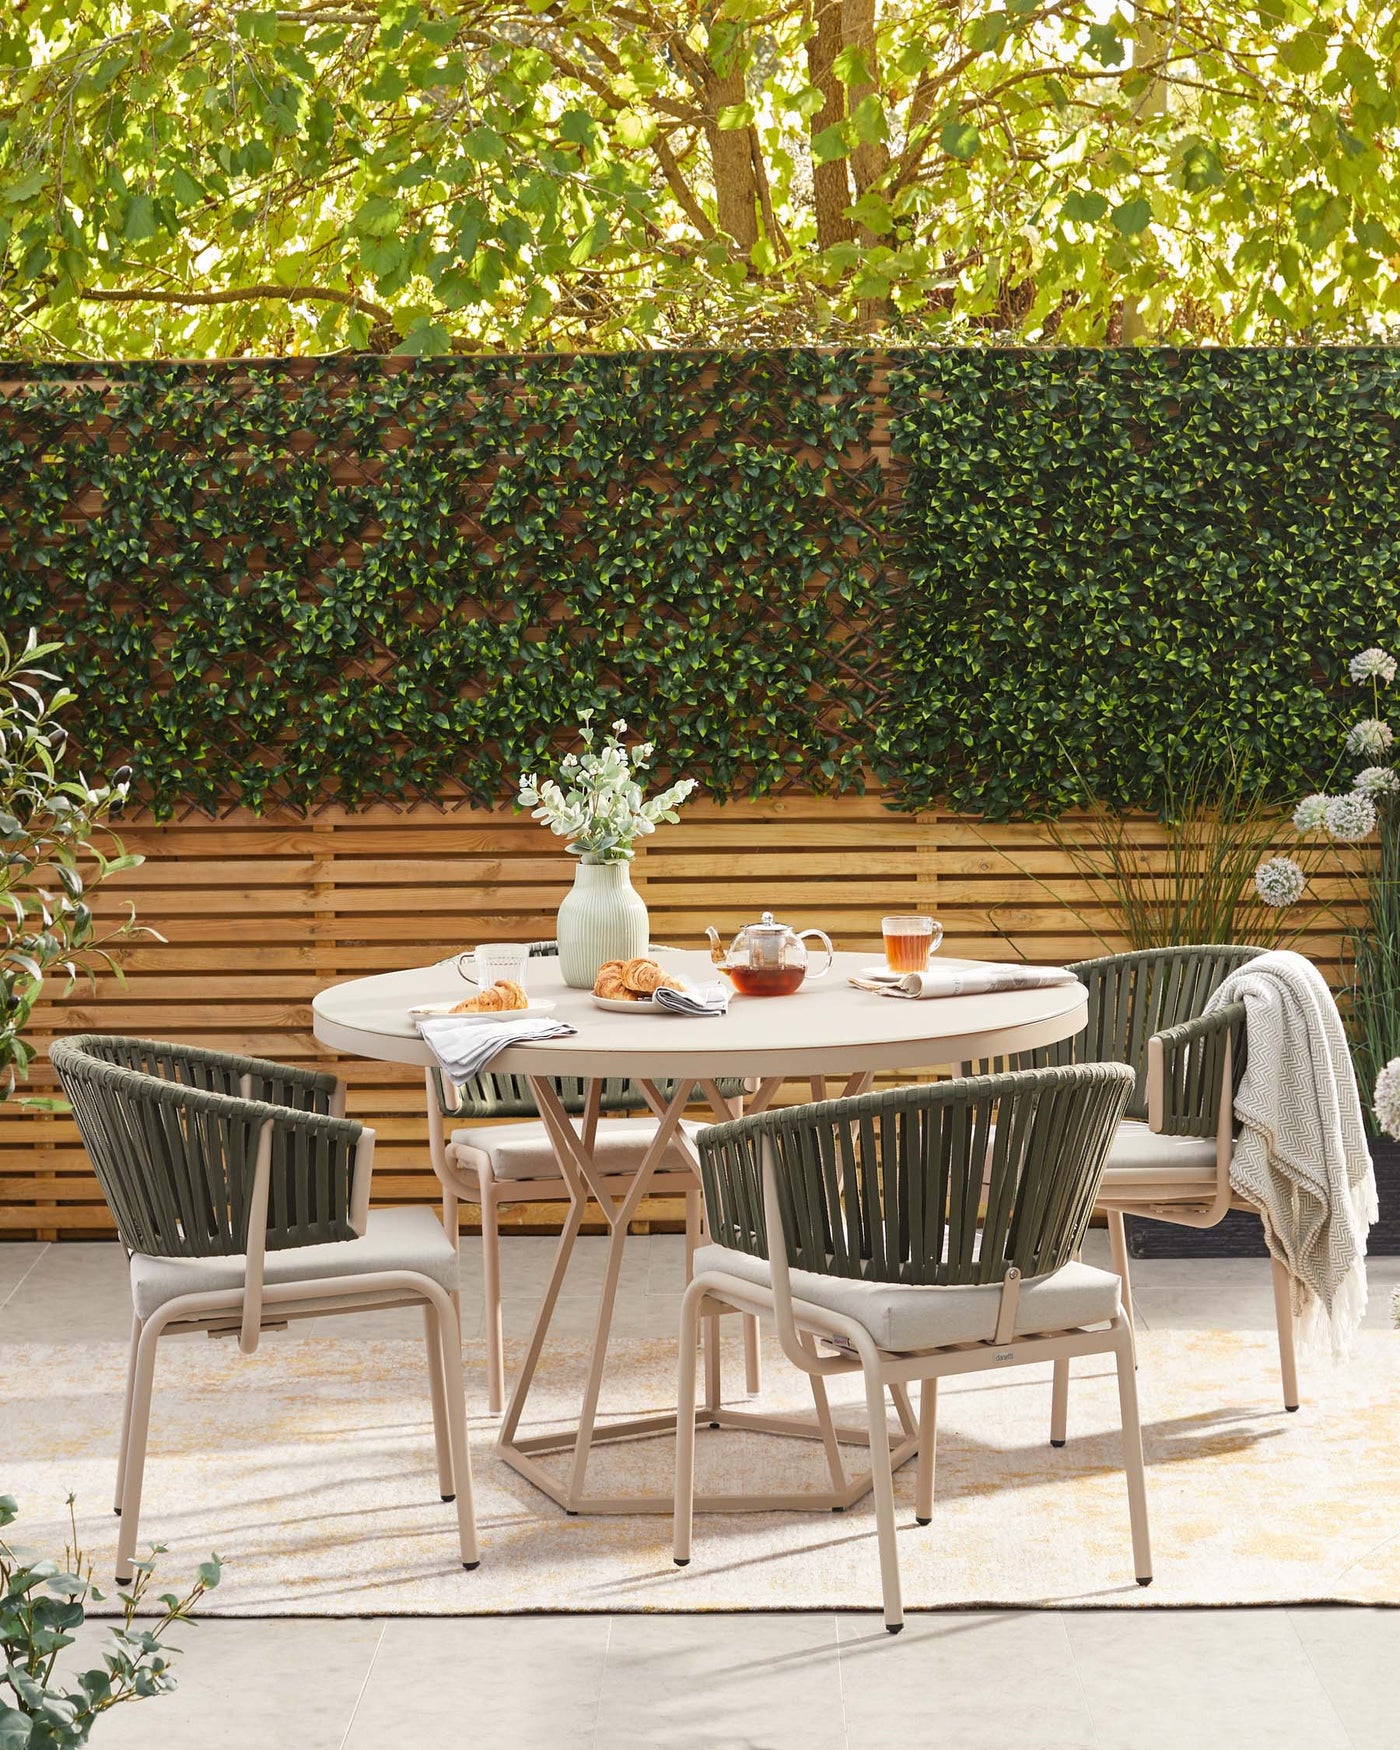 Outdoor patio set with a round, beige table and four modern armchairs with olive-green straps and beige frames, complemented by light grey cushions. A beige and white patterned area rug lies beneath the set. The table is adorned with a vase of white flowers, teapot, cups, and pastries, creating an inviting scene for al fresco dining.